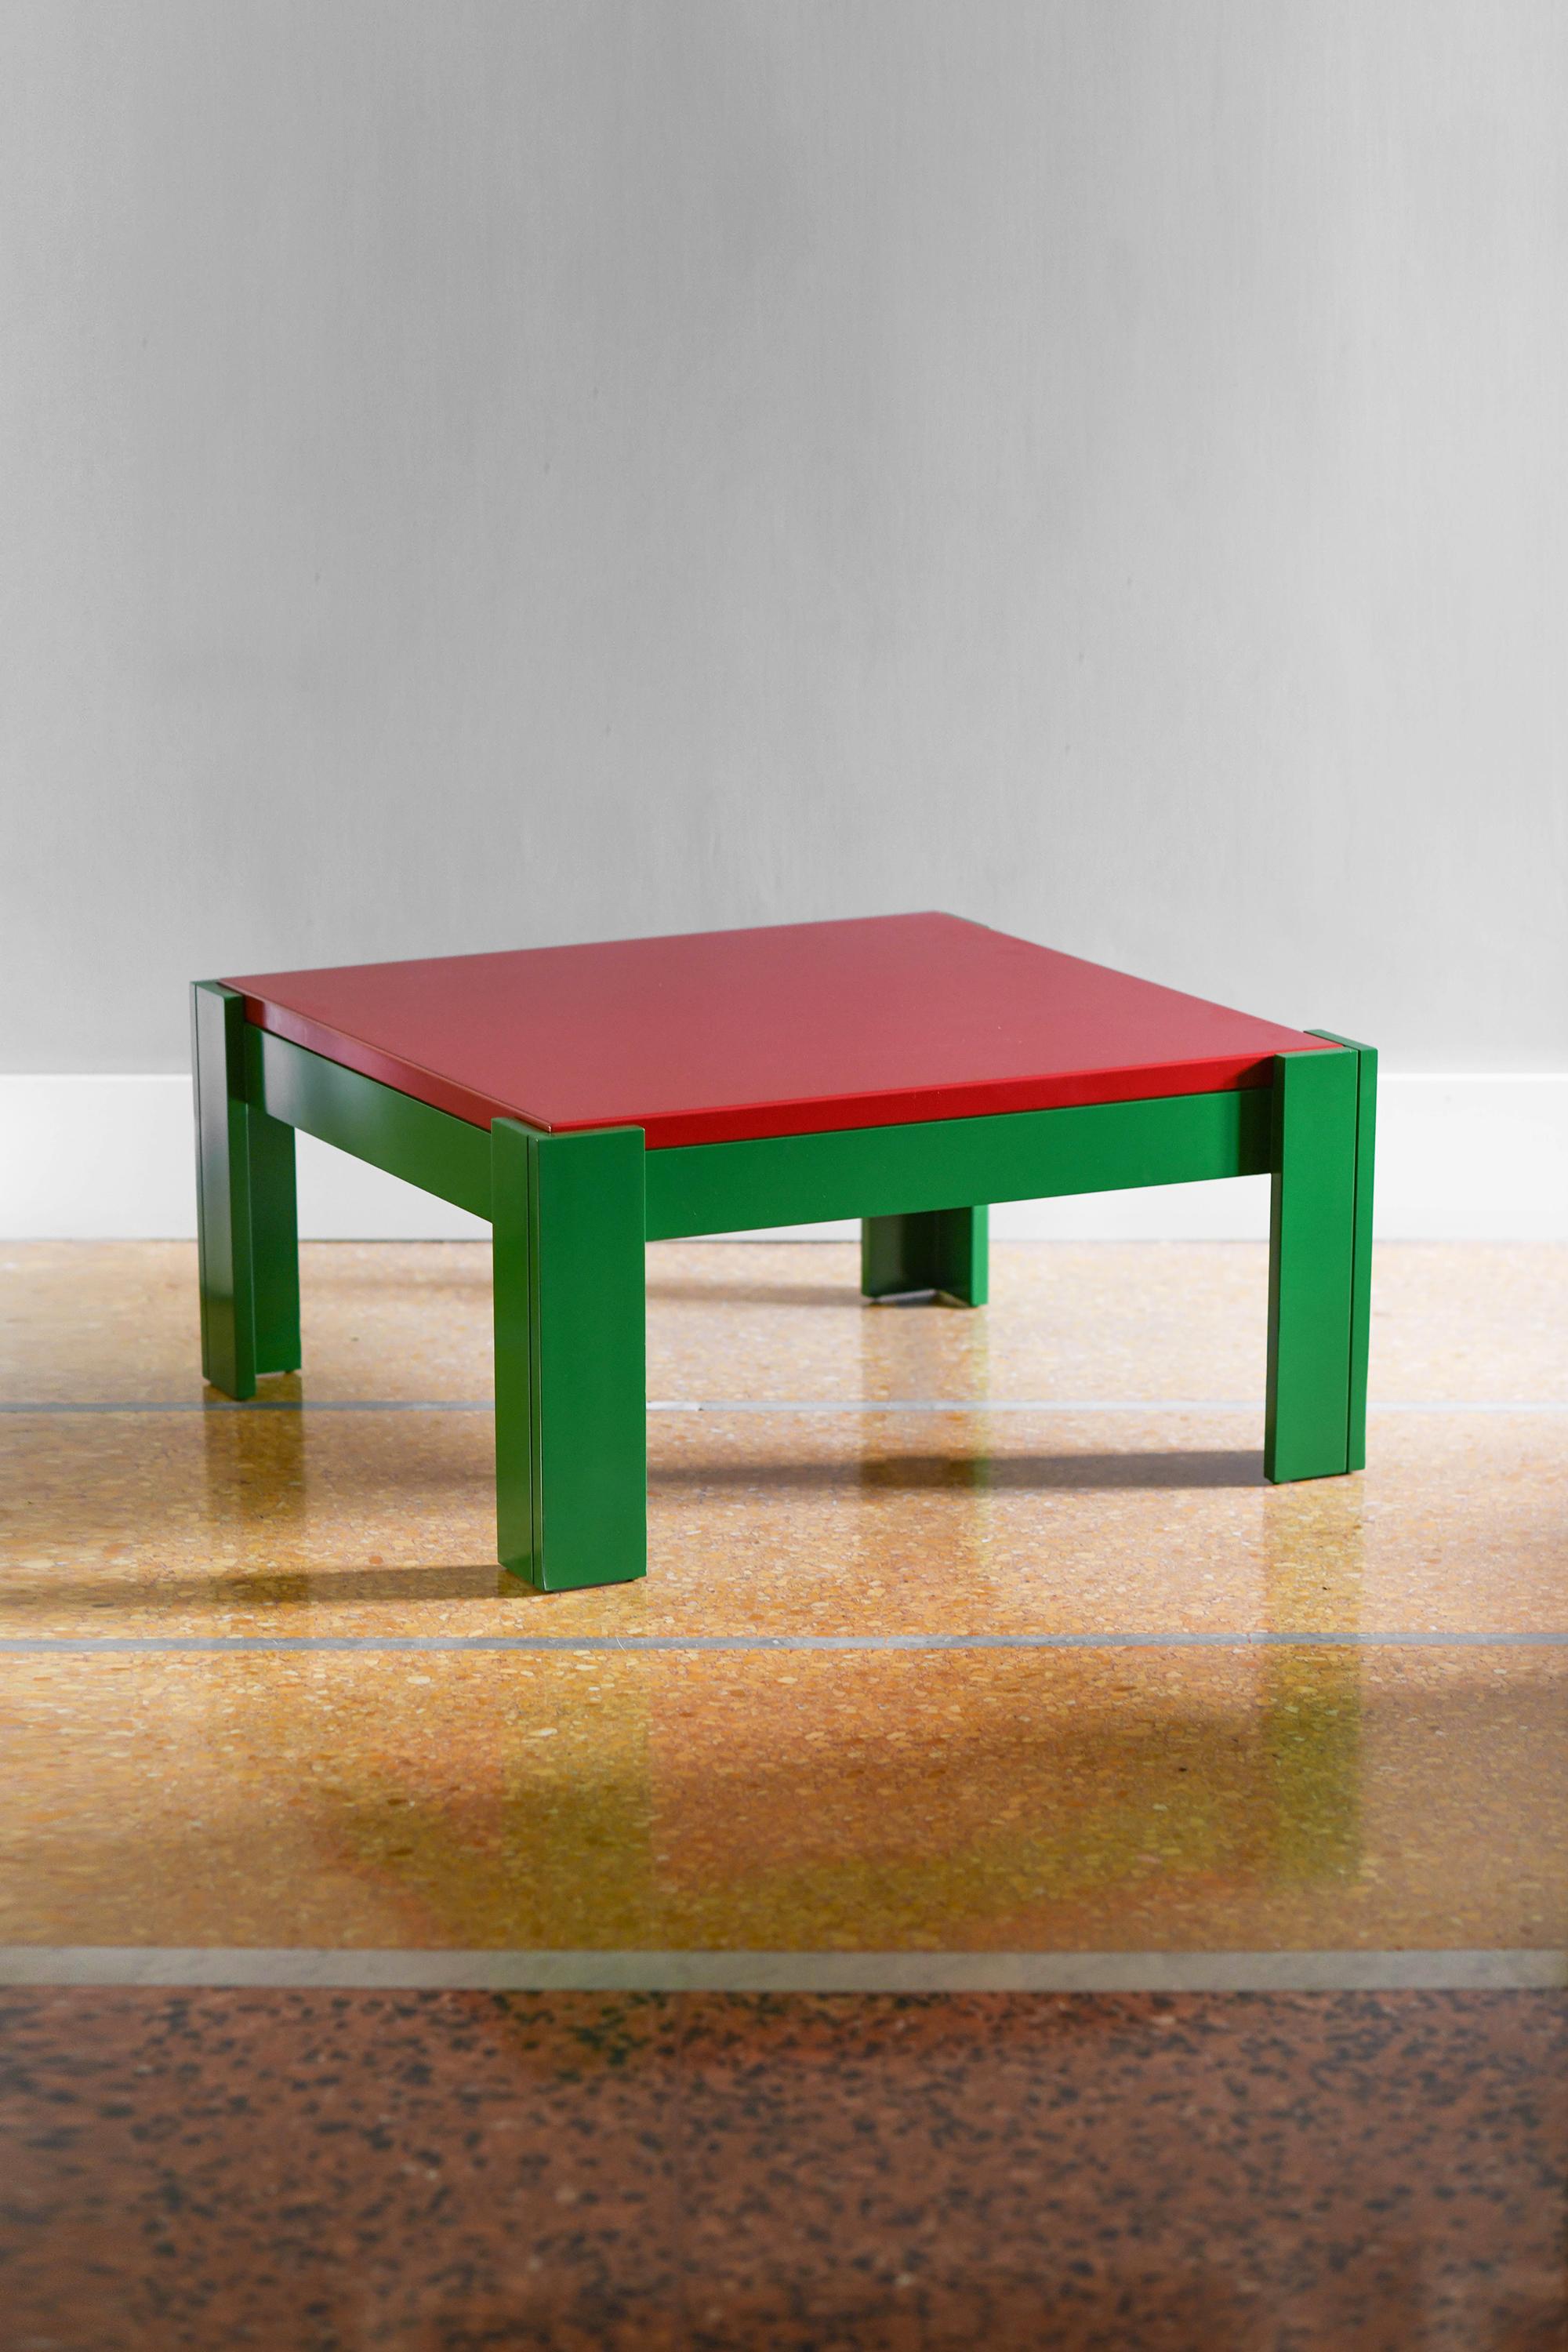 Coffee table in lacquered wood, Italy 1960s.
Product details
Dimensions 85 L x 40 H x 85 D cm
Italian Production, 1960s